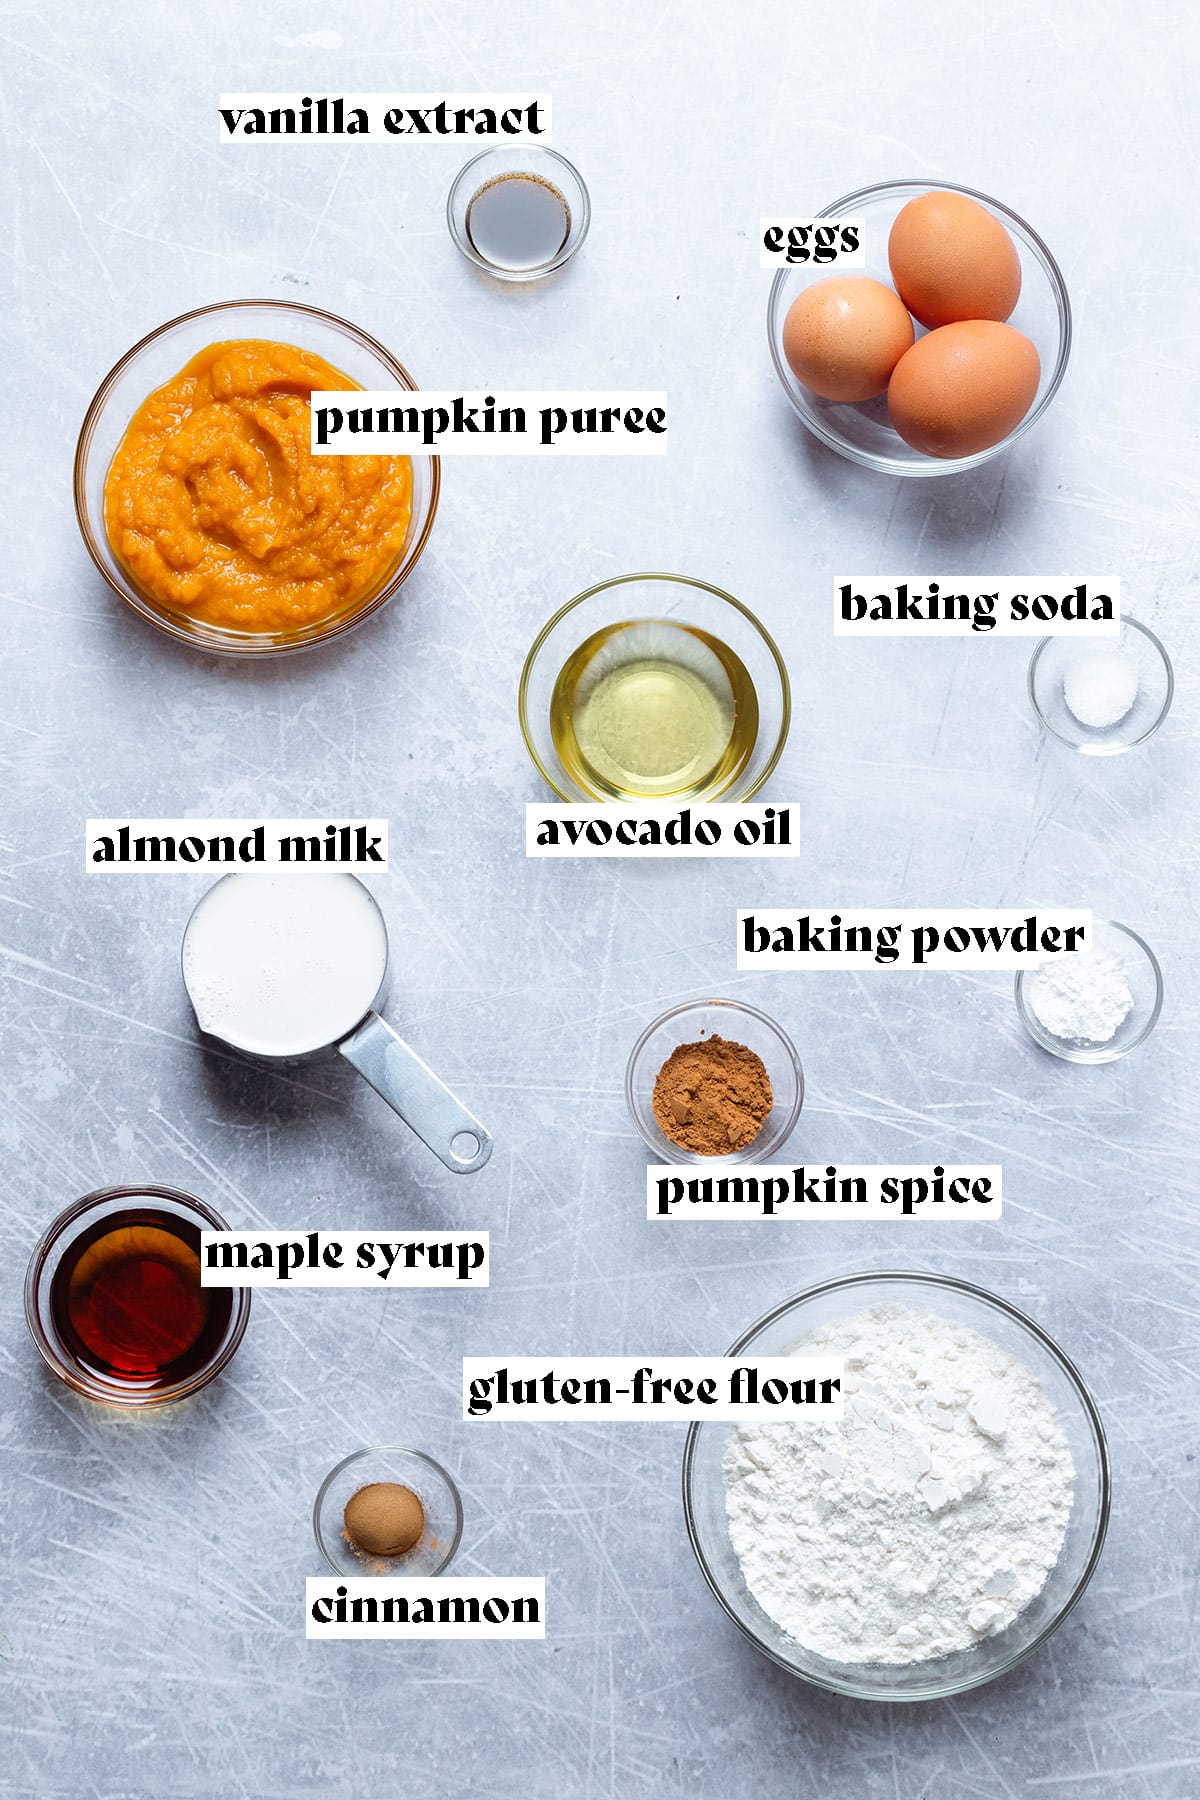 Ingredients like pumpkin puree, flour, milk, and eggs laid out on a grey background.